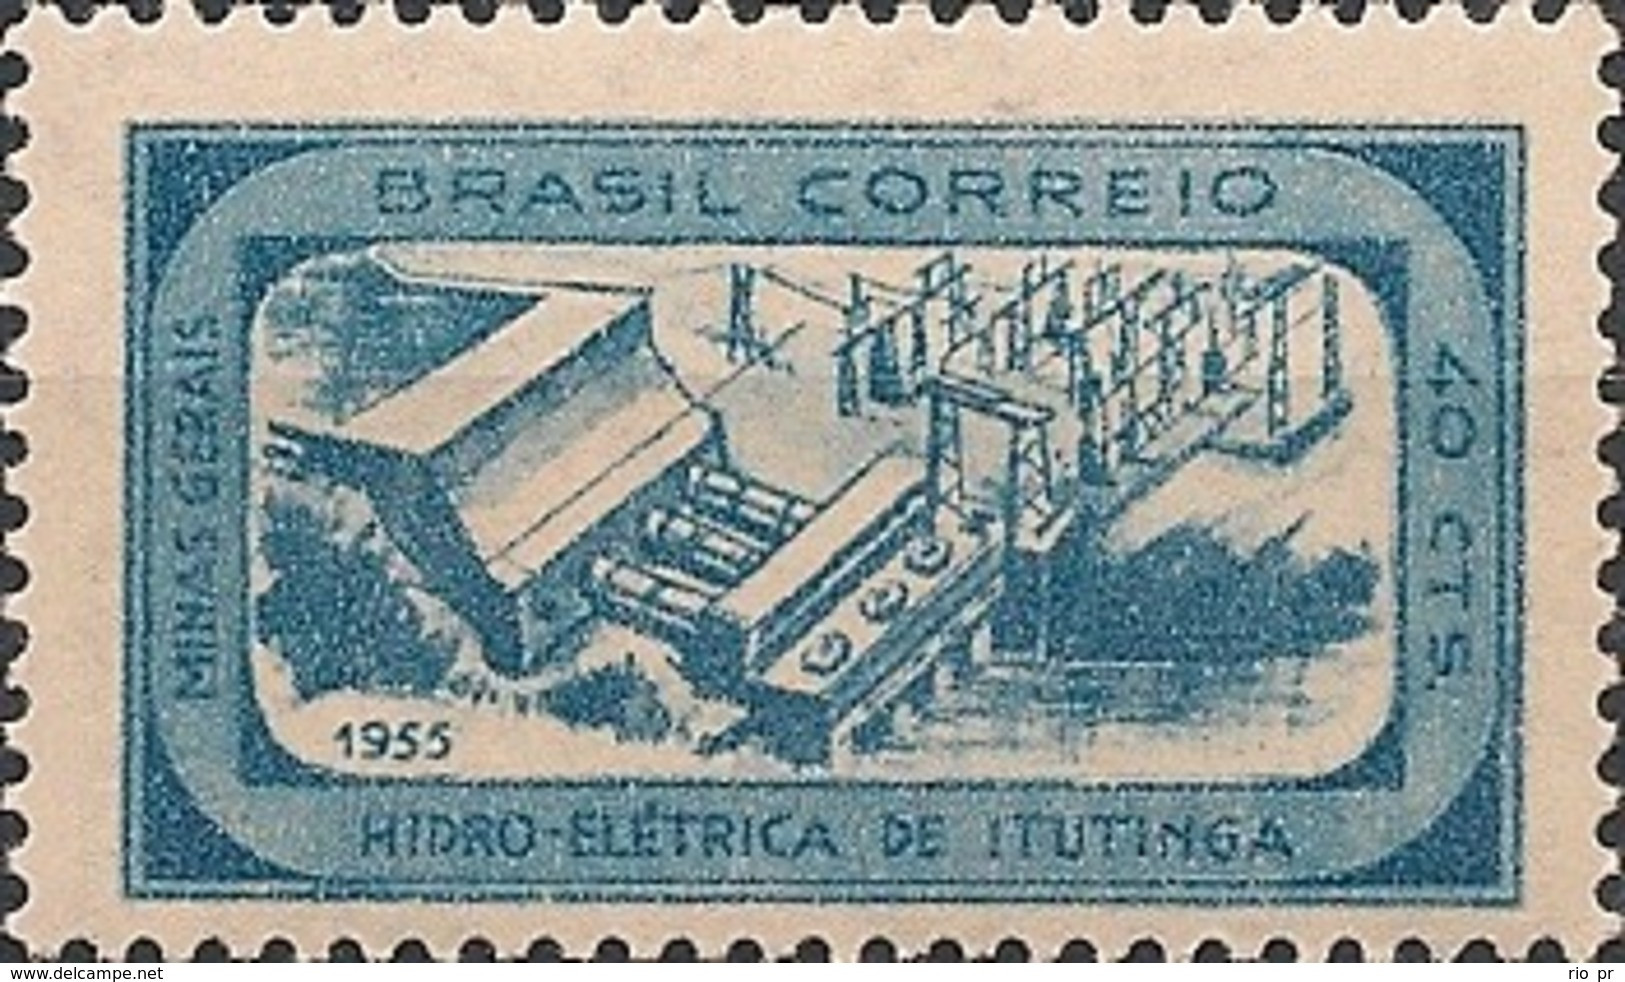 BRAZIL - INAUGURATION OF THE ITUTINGA HYDROELECTRIC PLANT AT LAVRAS 1955 - MNH - Wasser